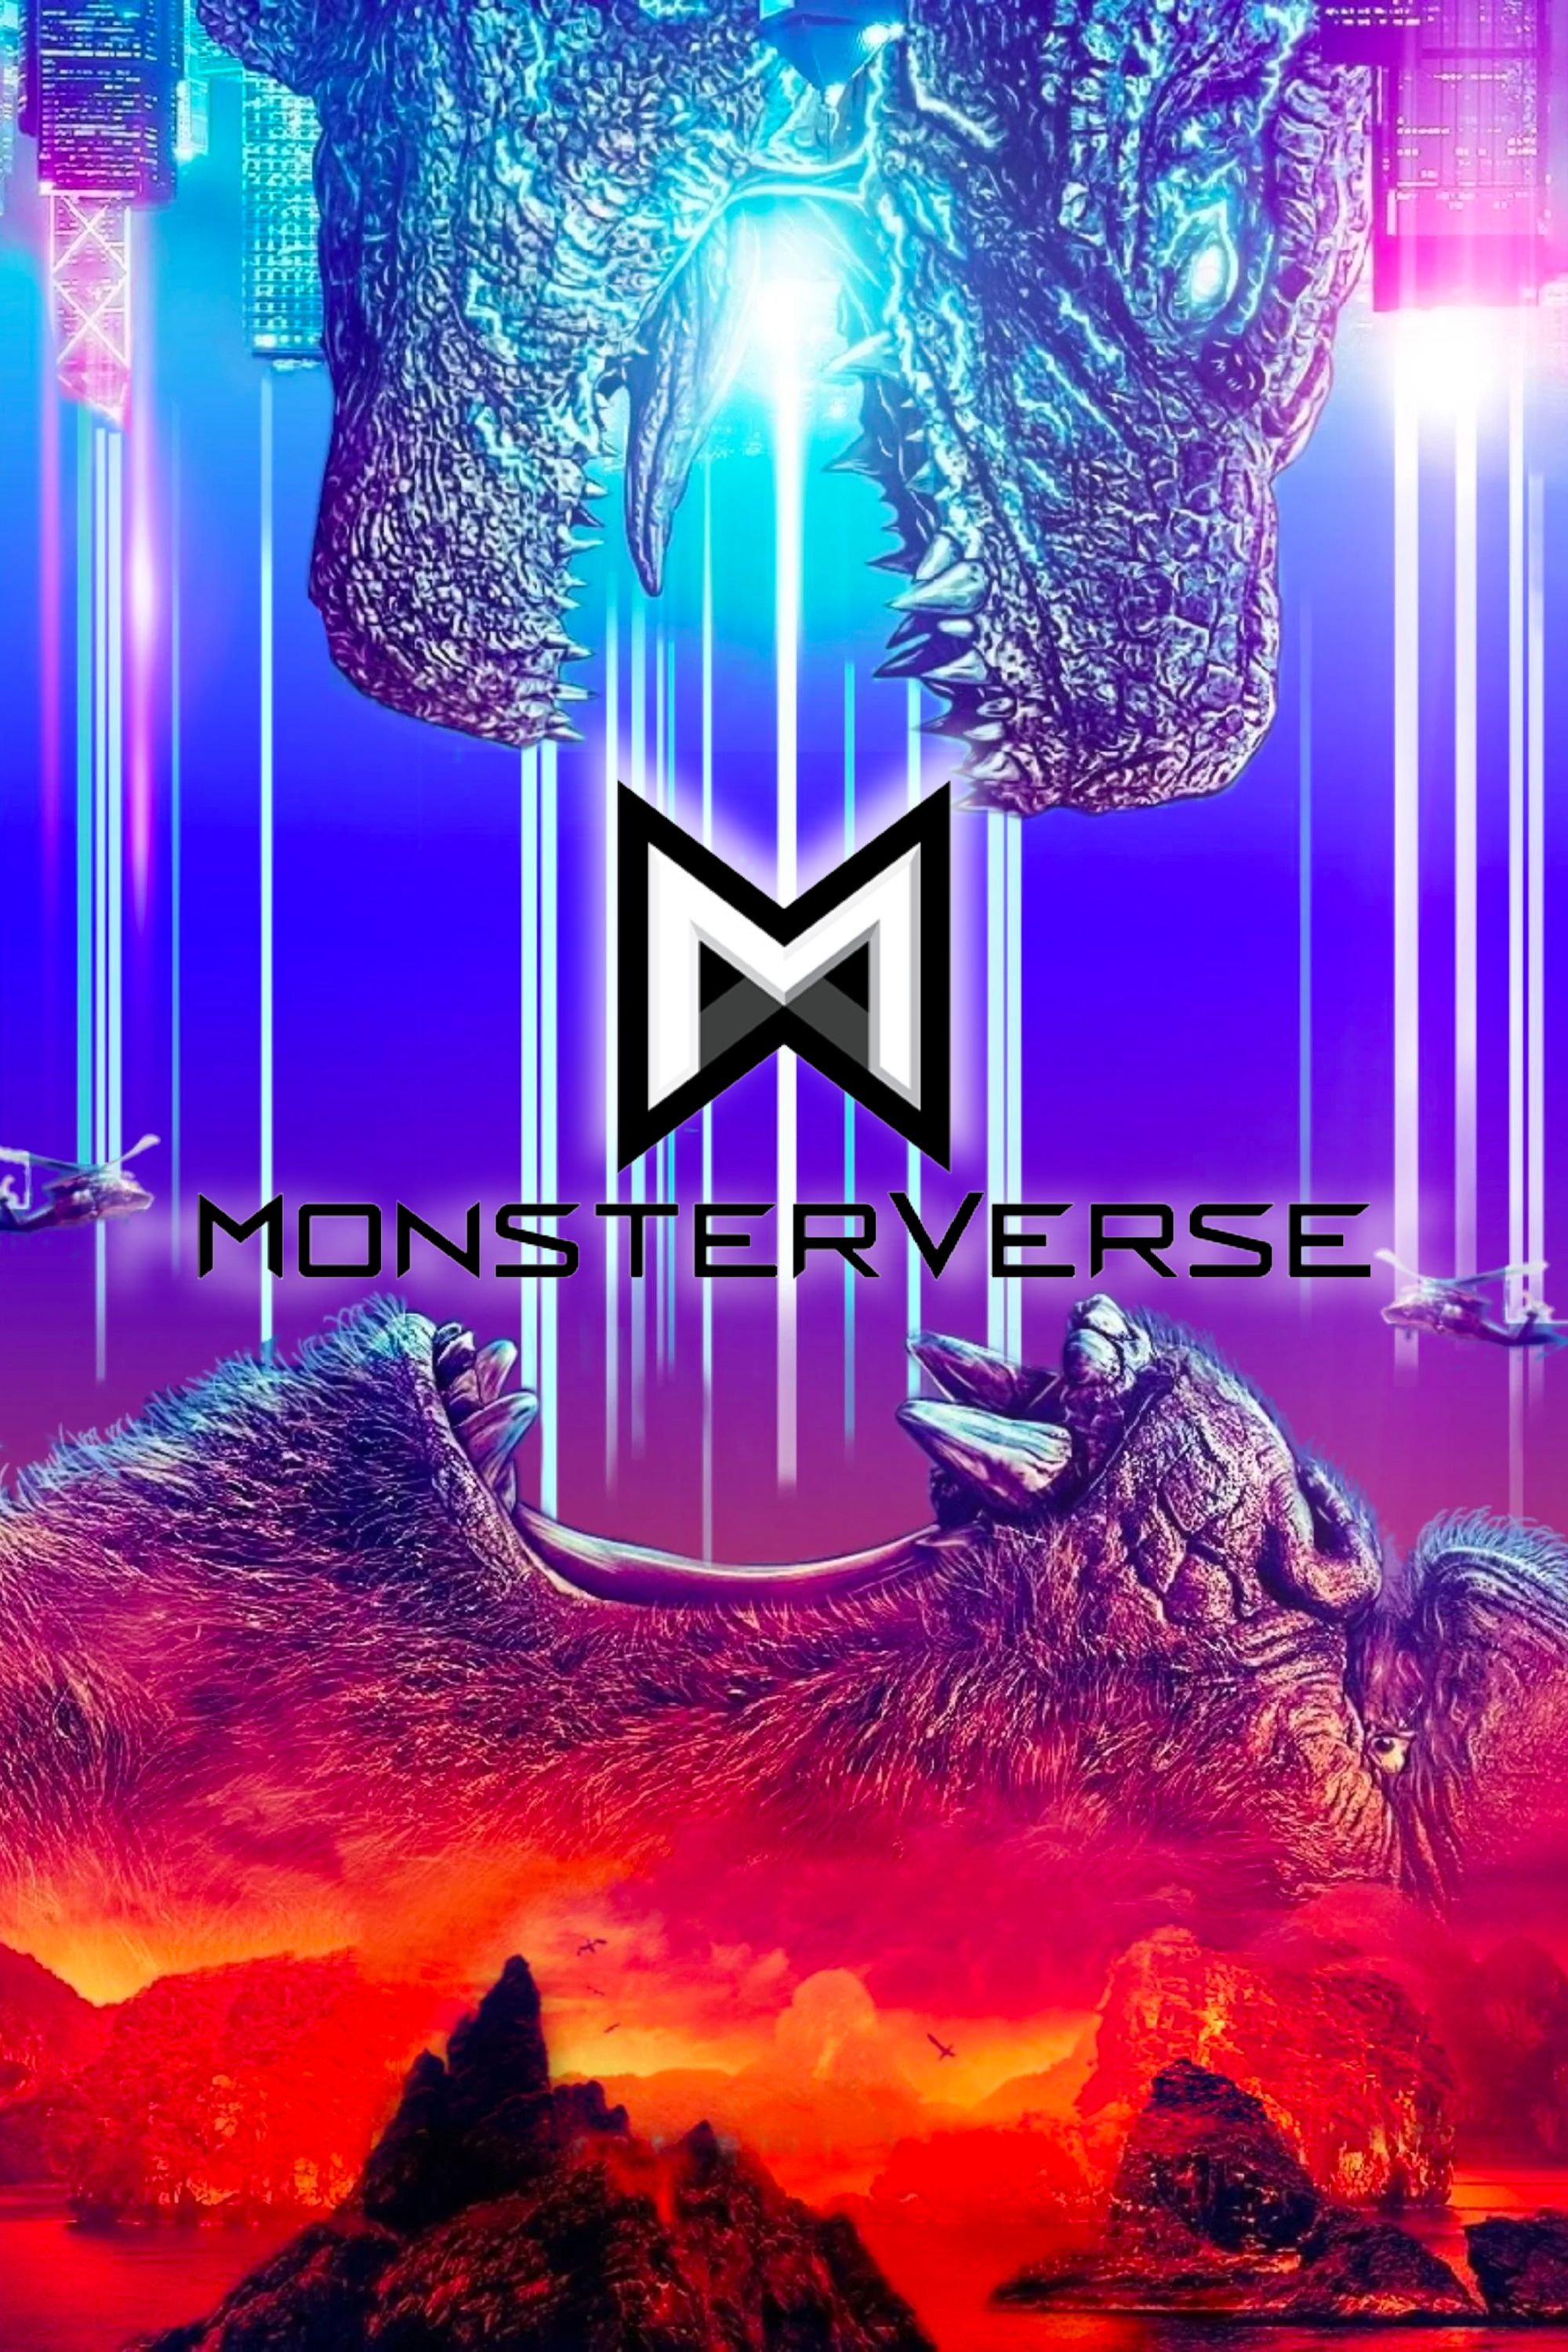 7 Monsterverse TV Show Spinoffs We Want To See After Monarch